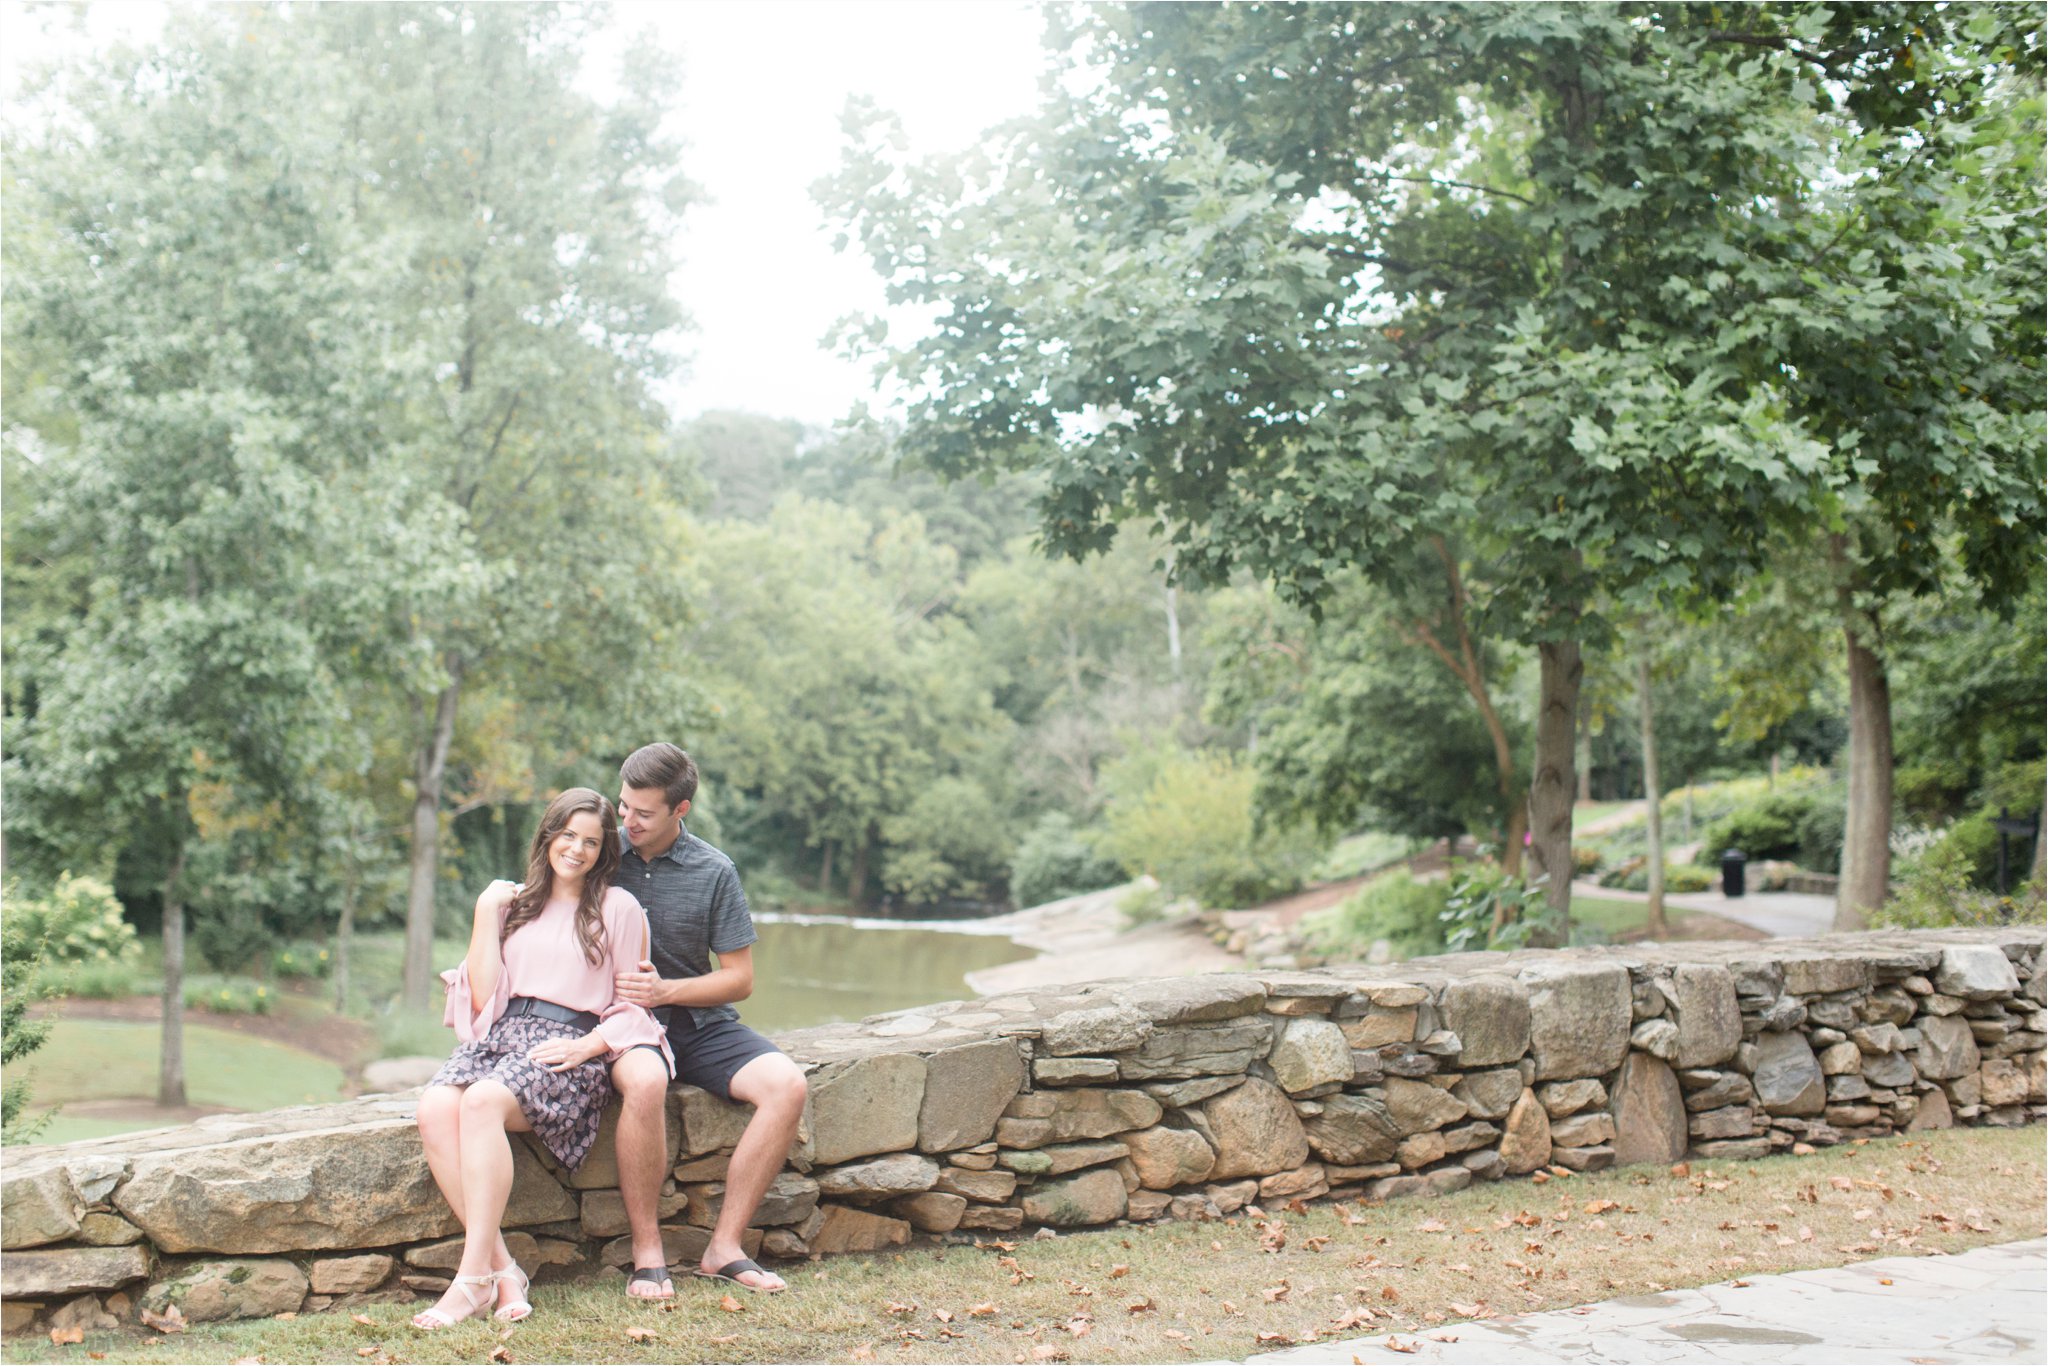 Downtown Greenville Engagement Session | Falls Park Greenville SC | South Carolina Wedding Photography | Christa Rene Photography